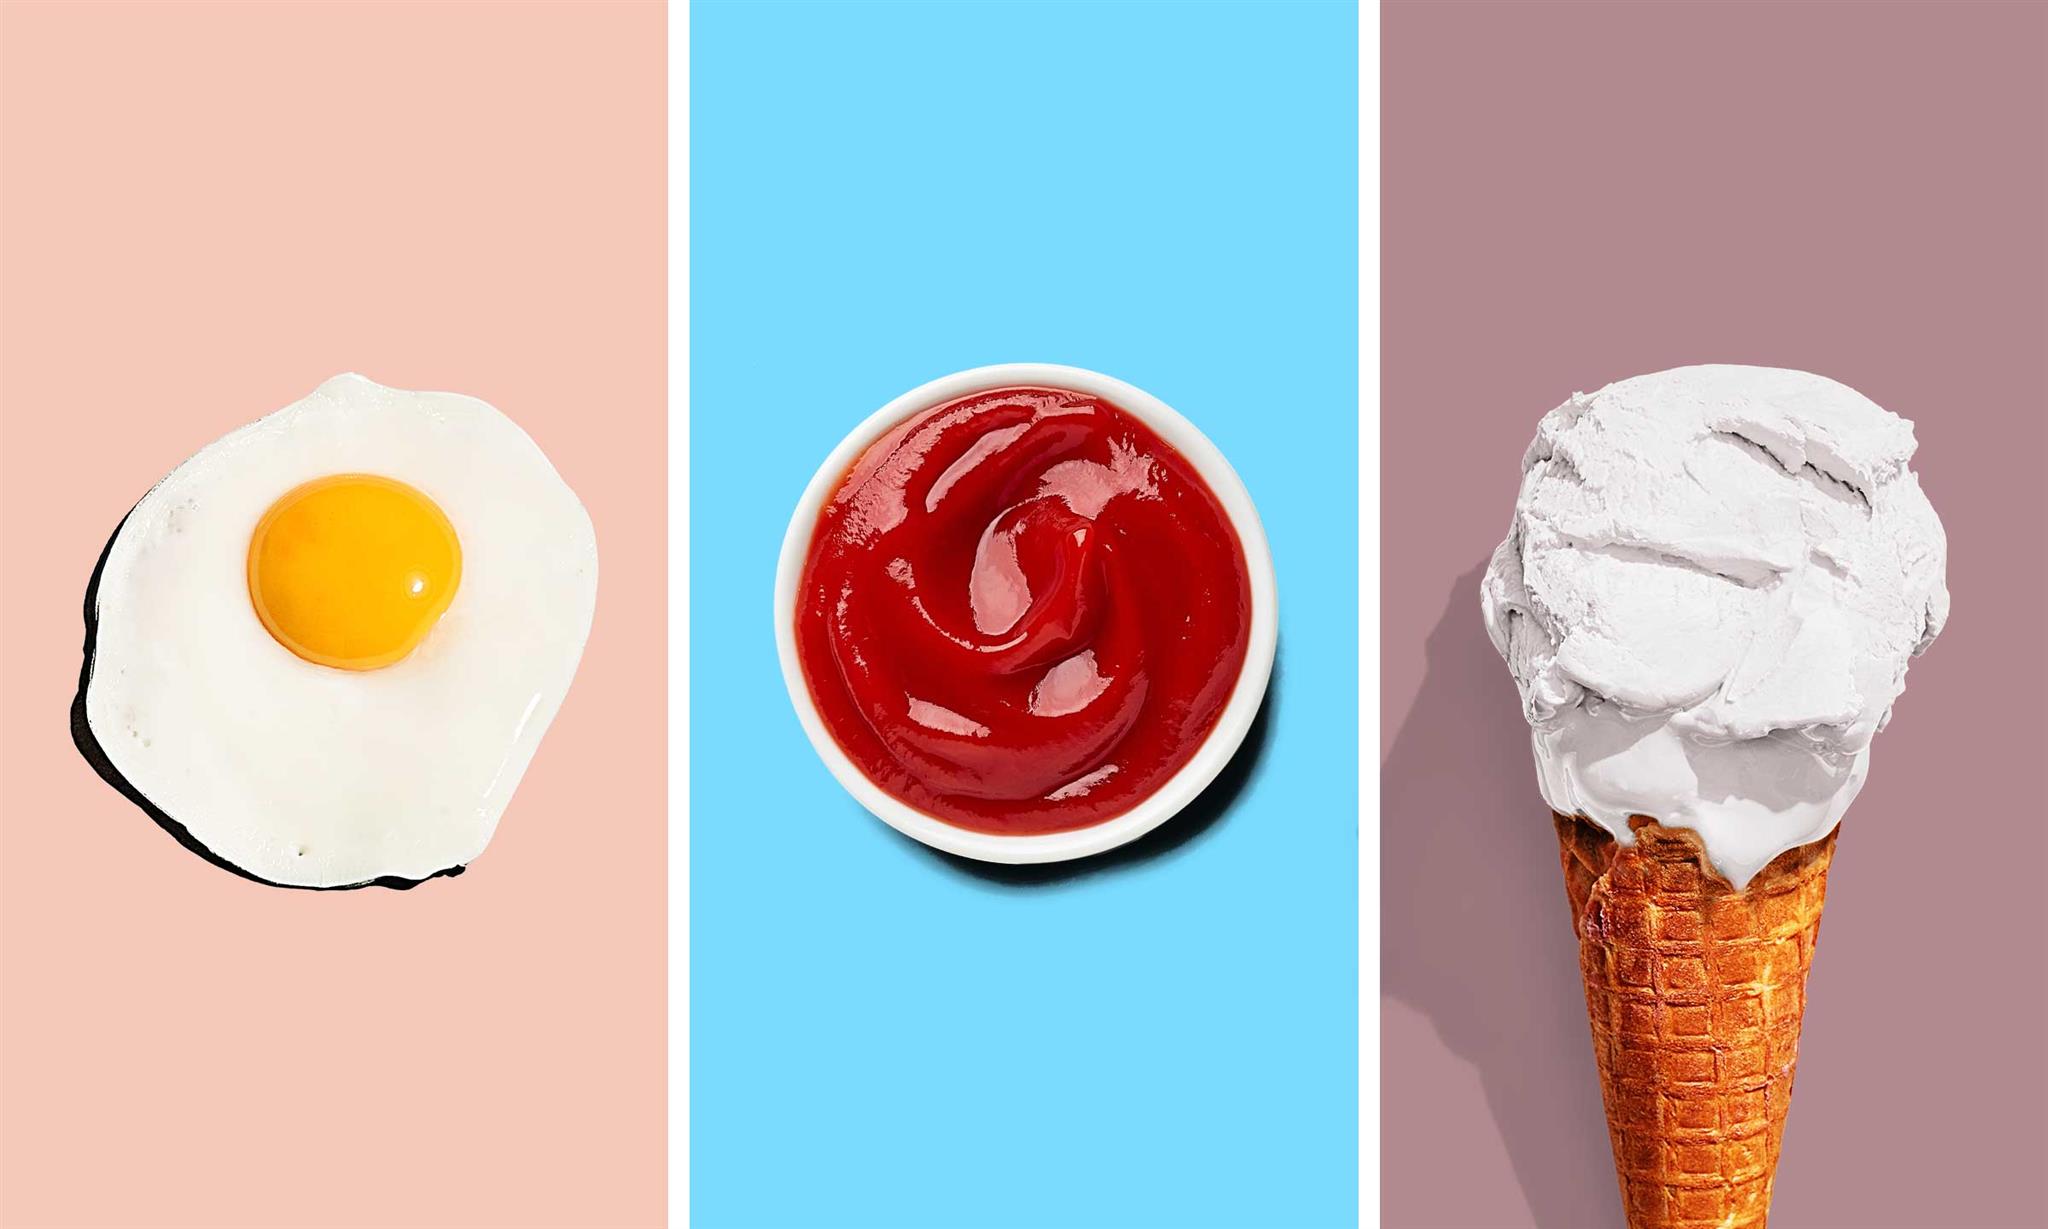 Fried egg, ketchup, ice cream